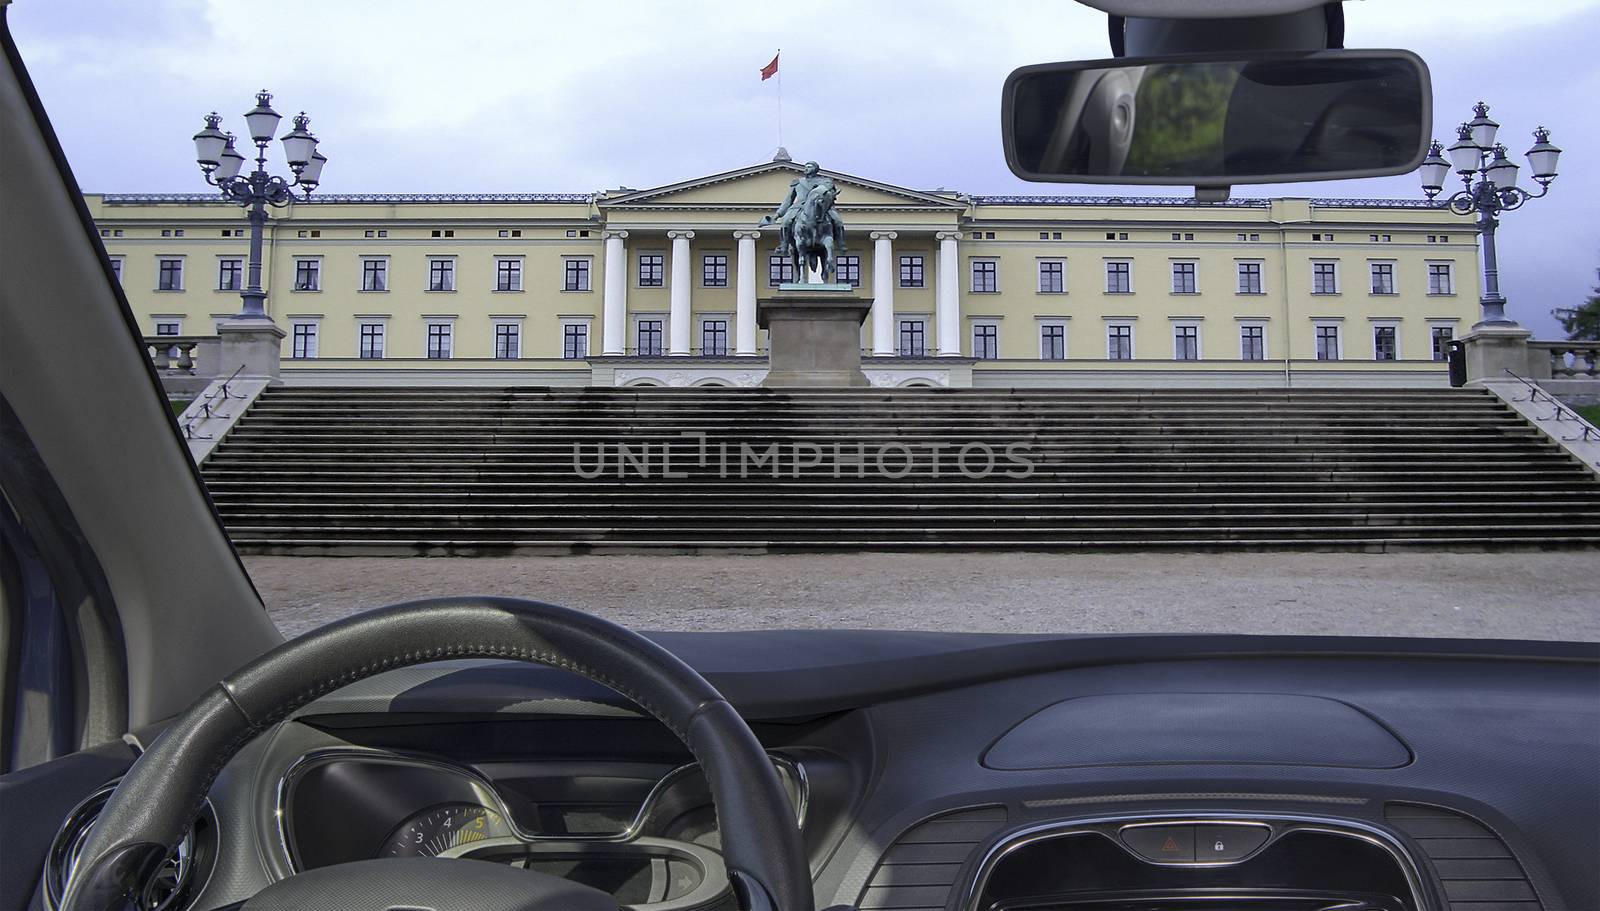 Looking through a car windshield with view of the Royal Palace in Oslo, Norway